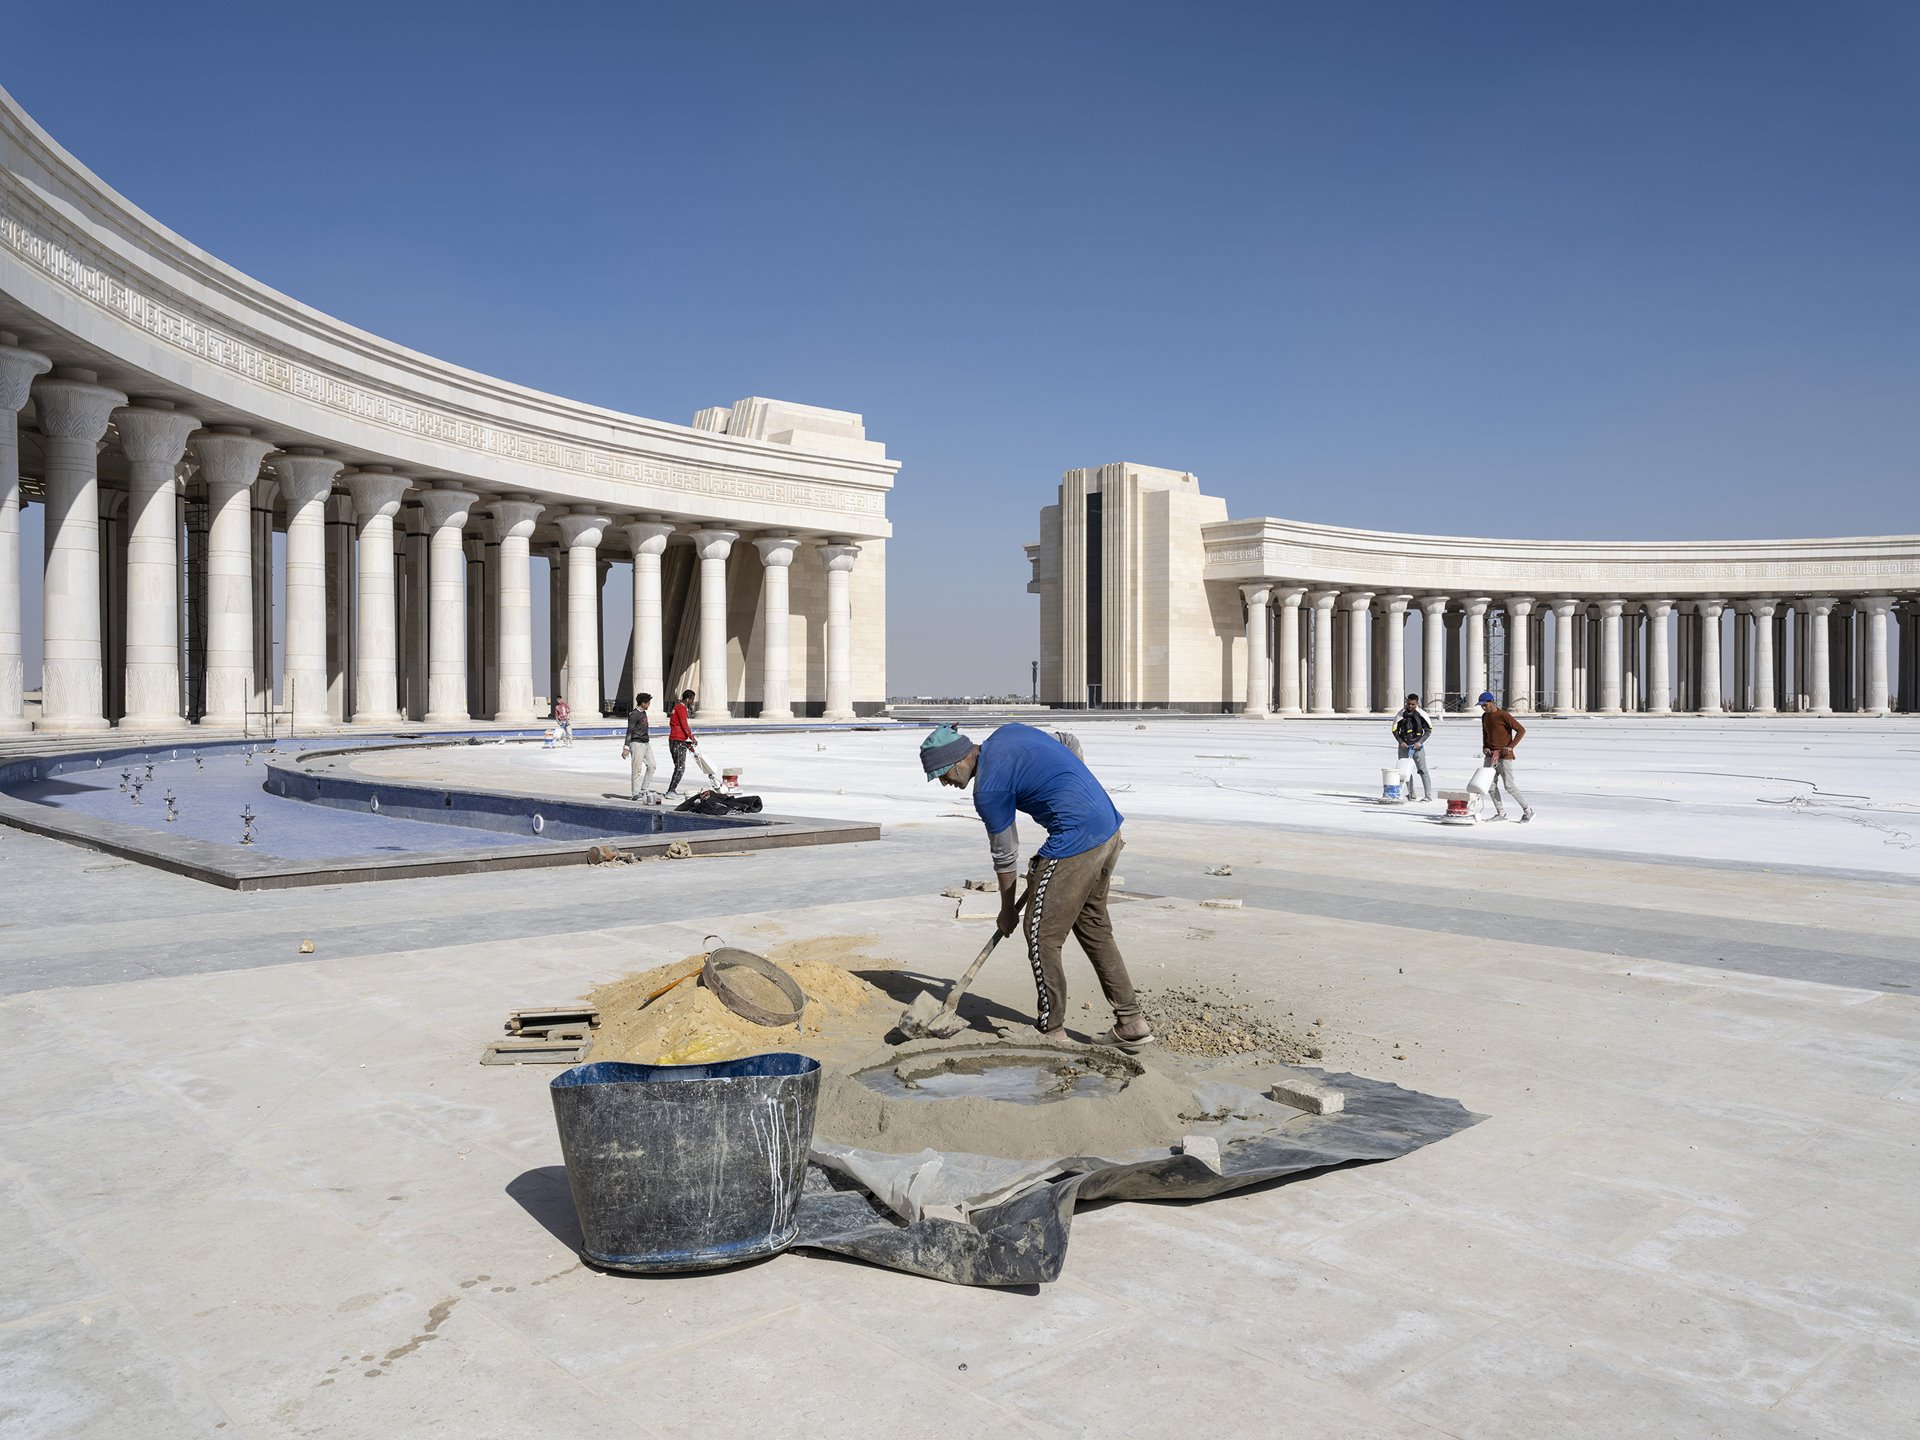 <p>Workers fill joints between paving stones at the Arc de Triomphe, situated between the Presidential Palace and the House of Representatives in Egypt&#39;s New Administrative Capital, under construction near Cairo.</p>
